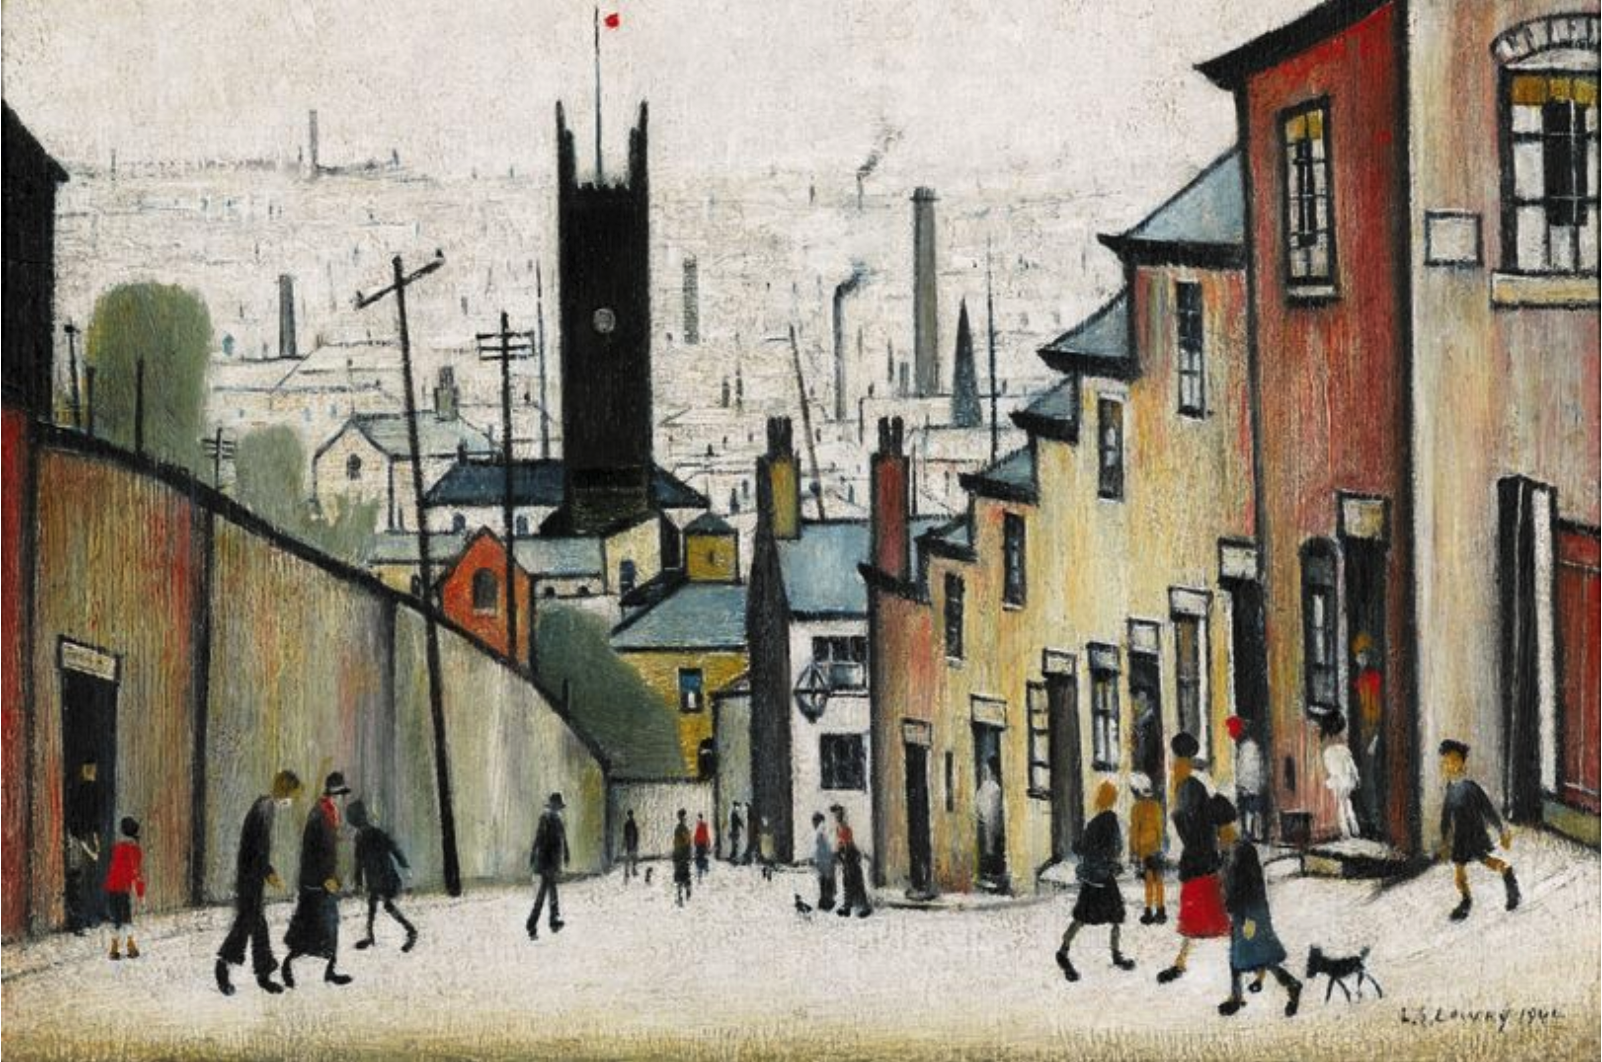 The Church in the Hallow (1944) by Laurence Stephen Lowry (1887 - 1976), English artist.